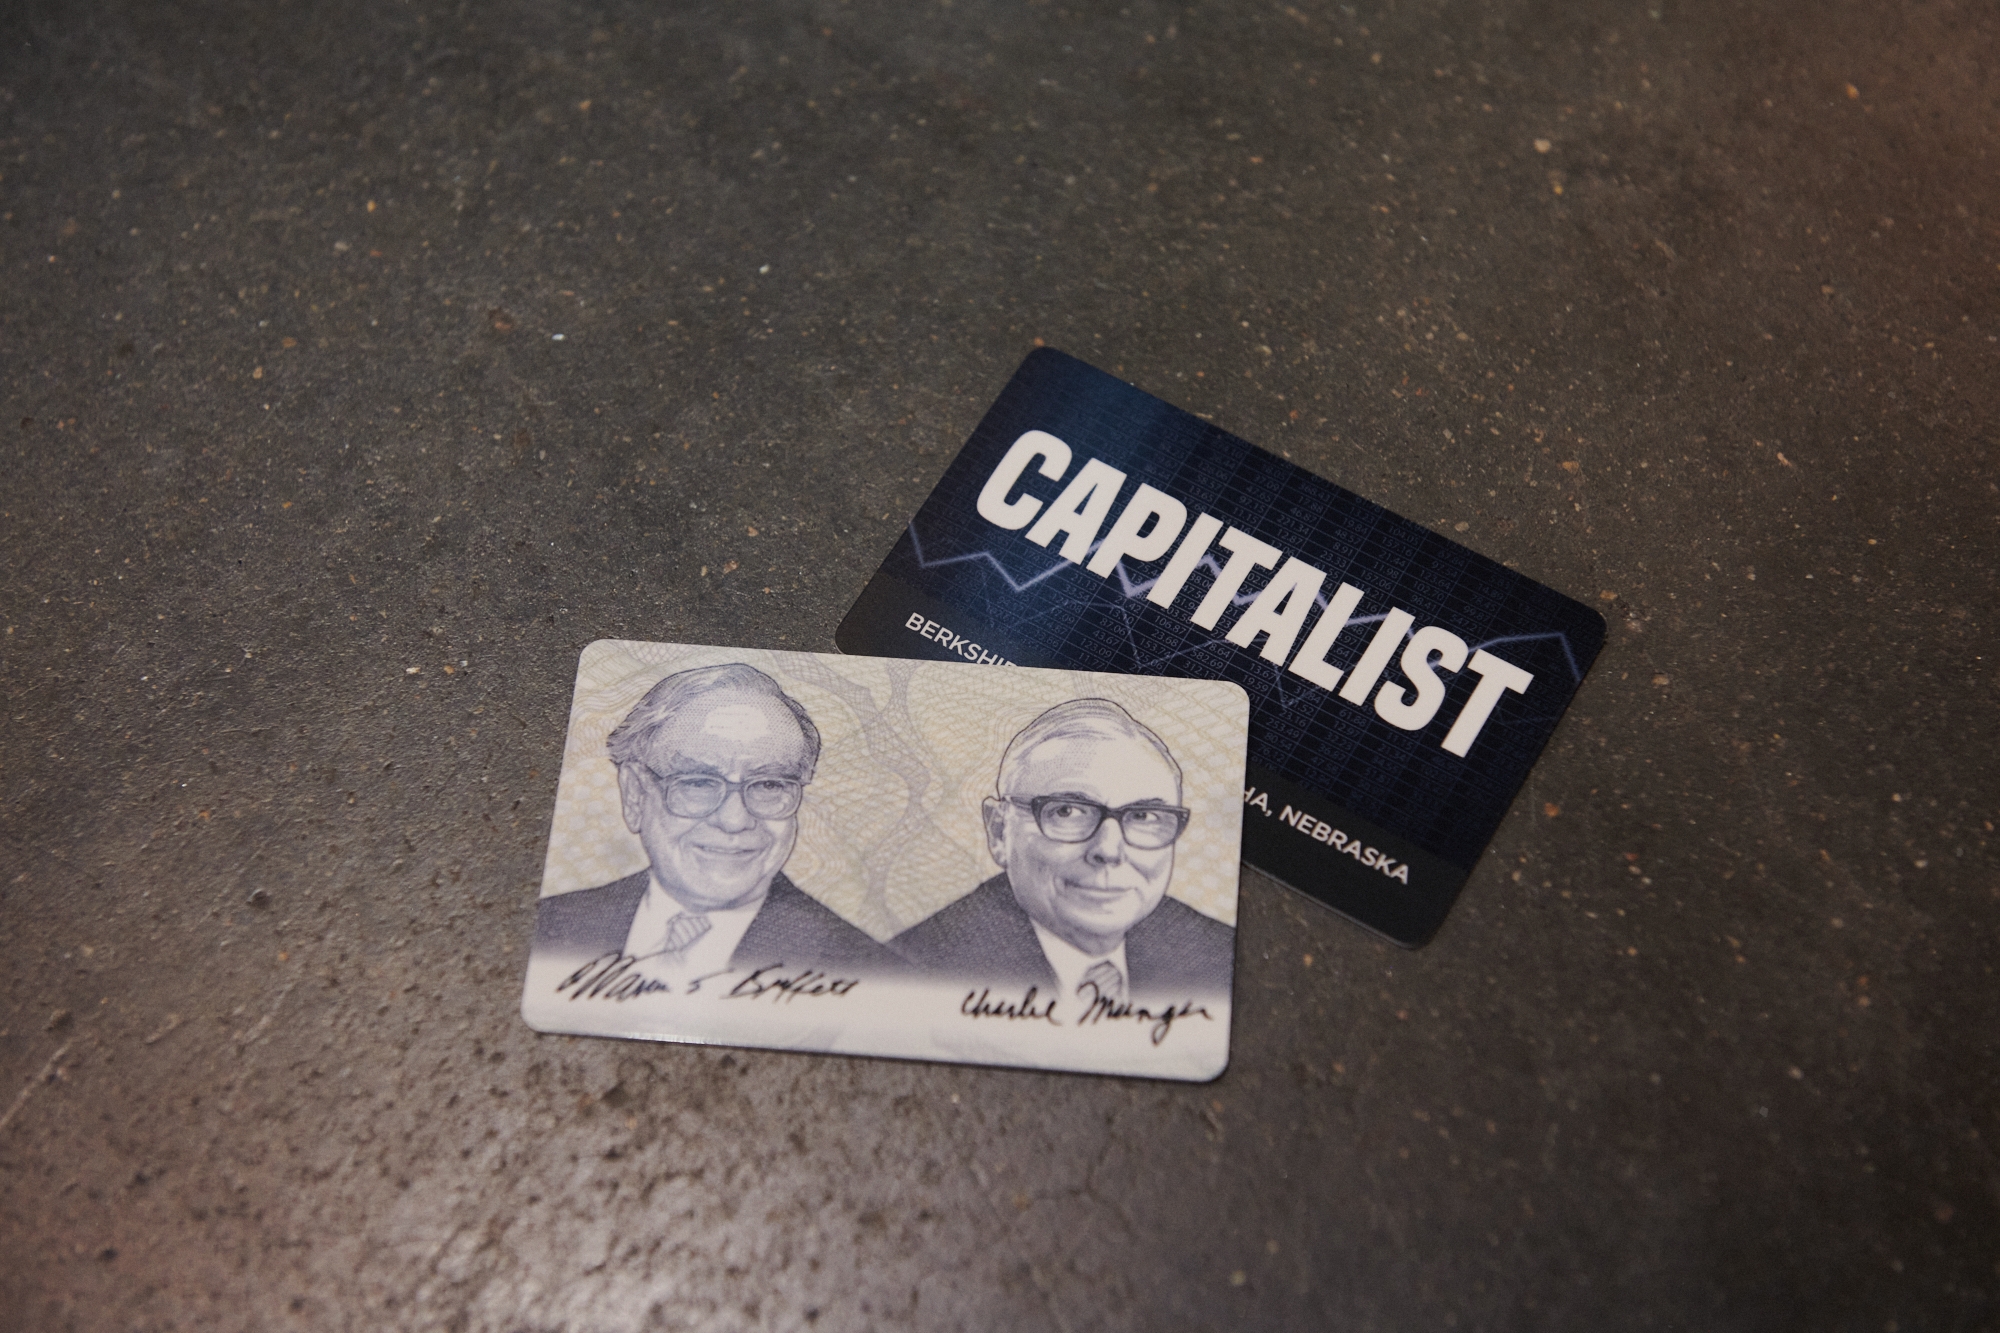 Warren Buffet, left, and Charlie Munger on capitalist cards offered during a shareholders shopping day ahead of the Berkshire Hathaway annual meeting in Omaha, Nebraska, on Friday, April 29.